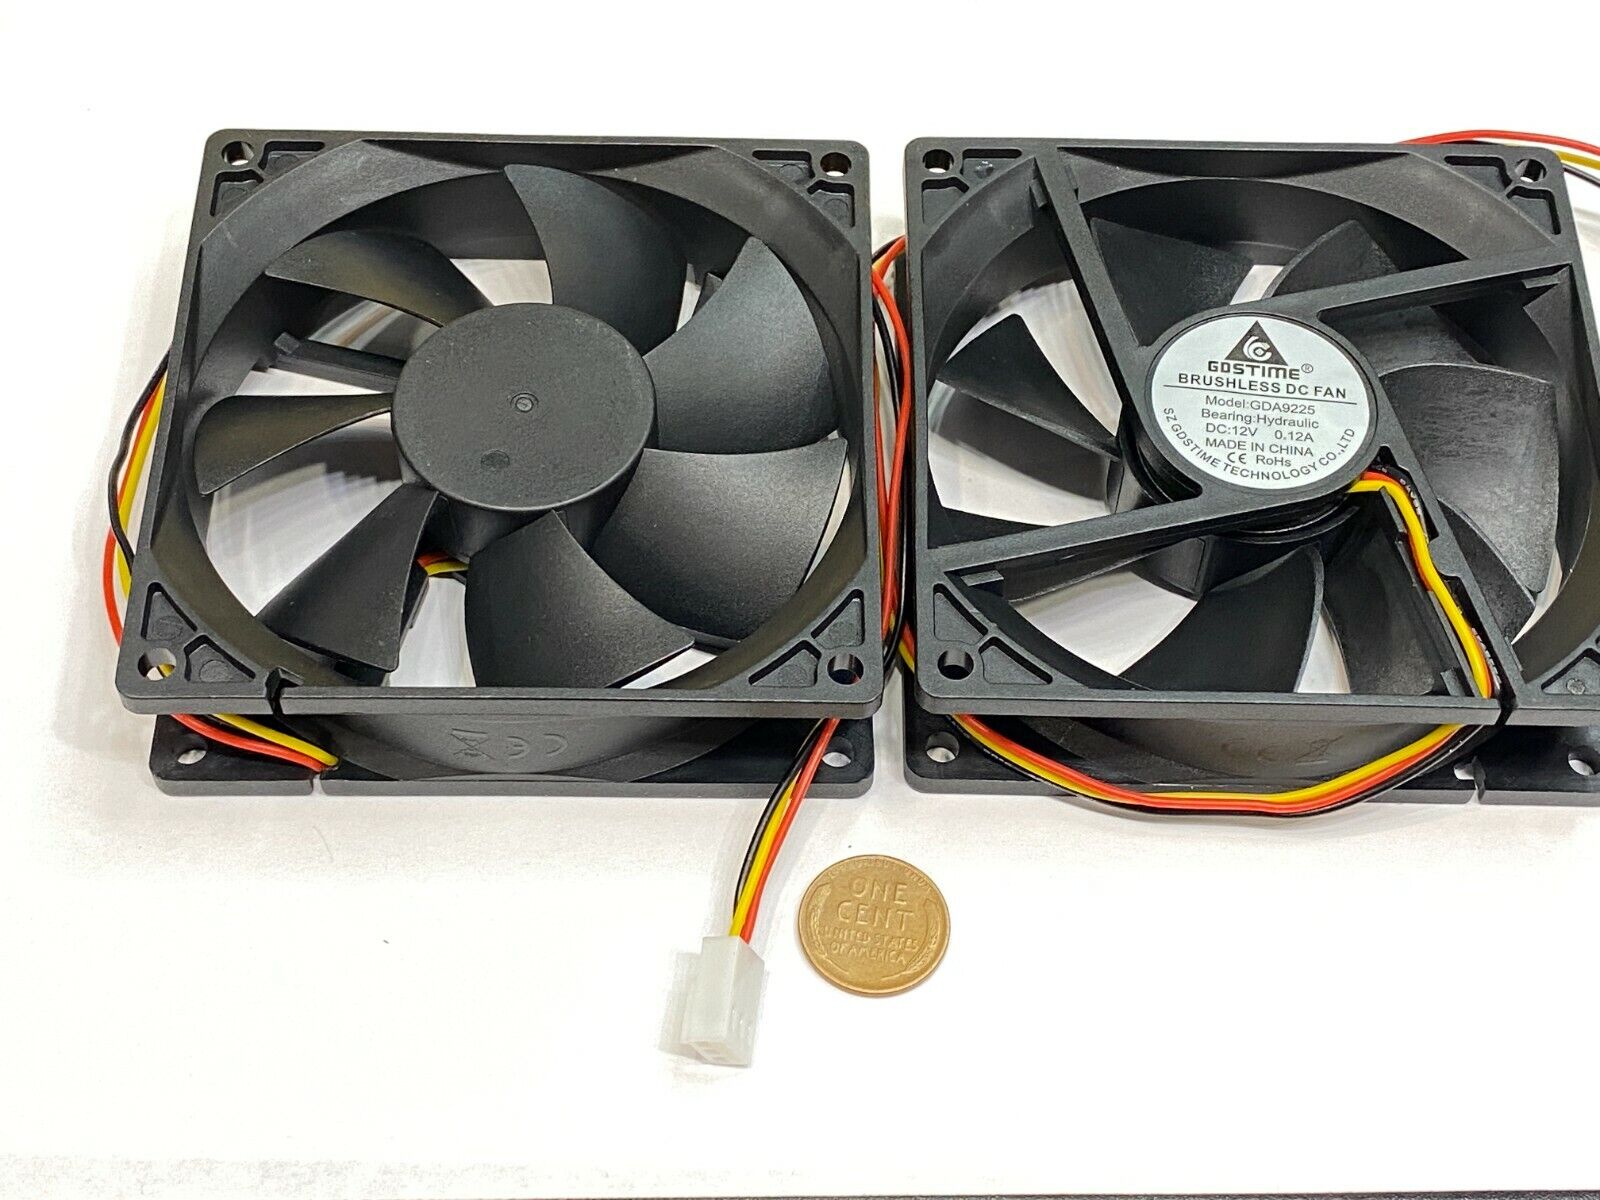 2x 9225 12V 92mm 25mm 3pin Cooling computer Fan PC Case Power Supply gda9225